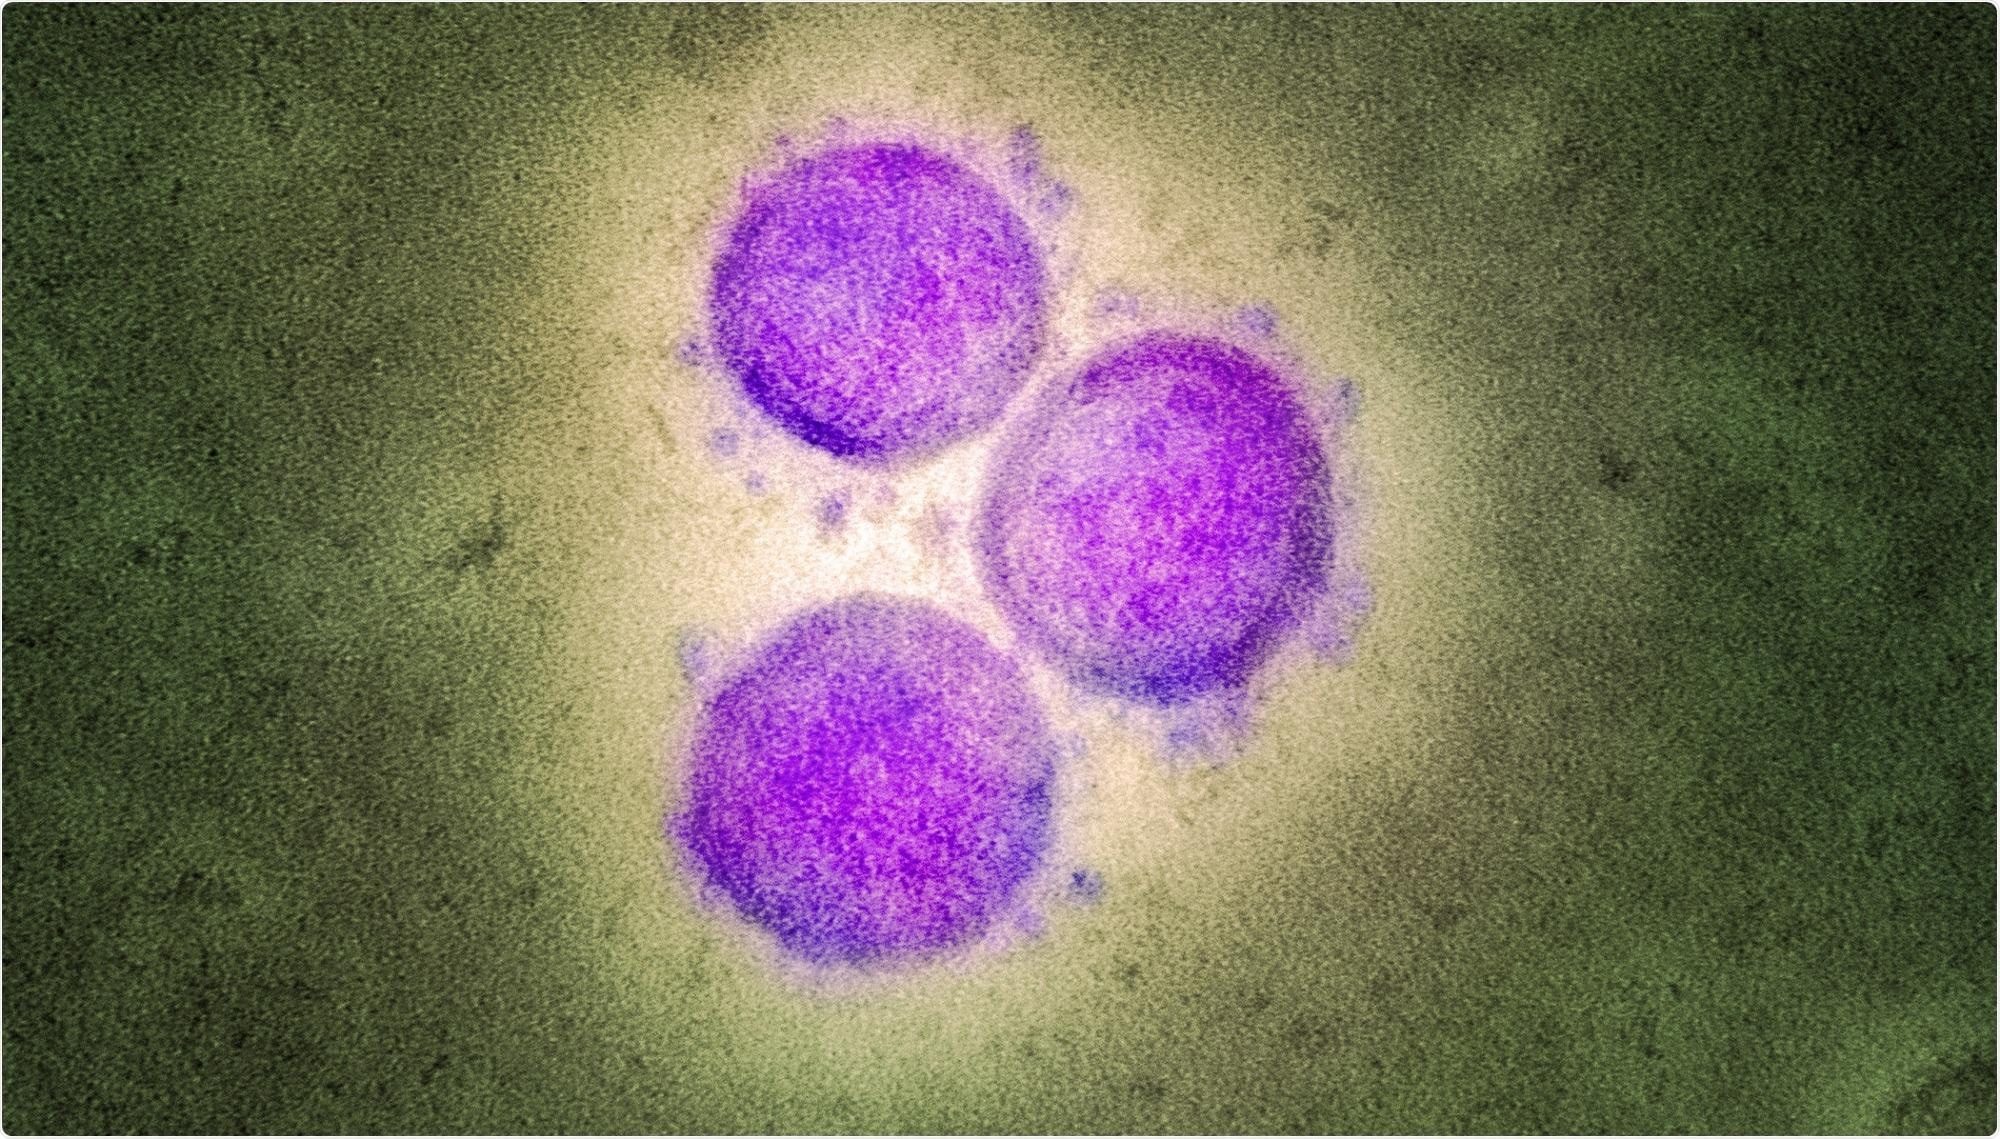 Study: NOVEL RT-qPCR ASSAYS ENABLE RAPID DETECTION AND DIFFERENTIATION BETWEEN SARS-COV-2 OMICRON (BA.1) AND BA.2 VARIANTS. Image Credit: NIAID